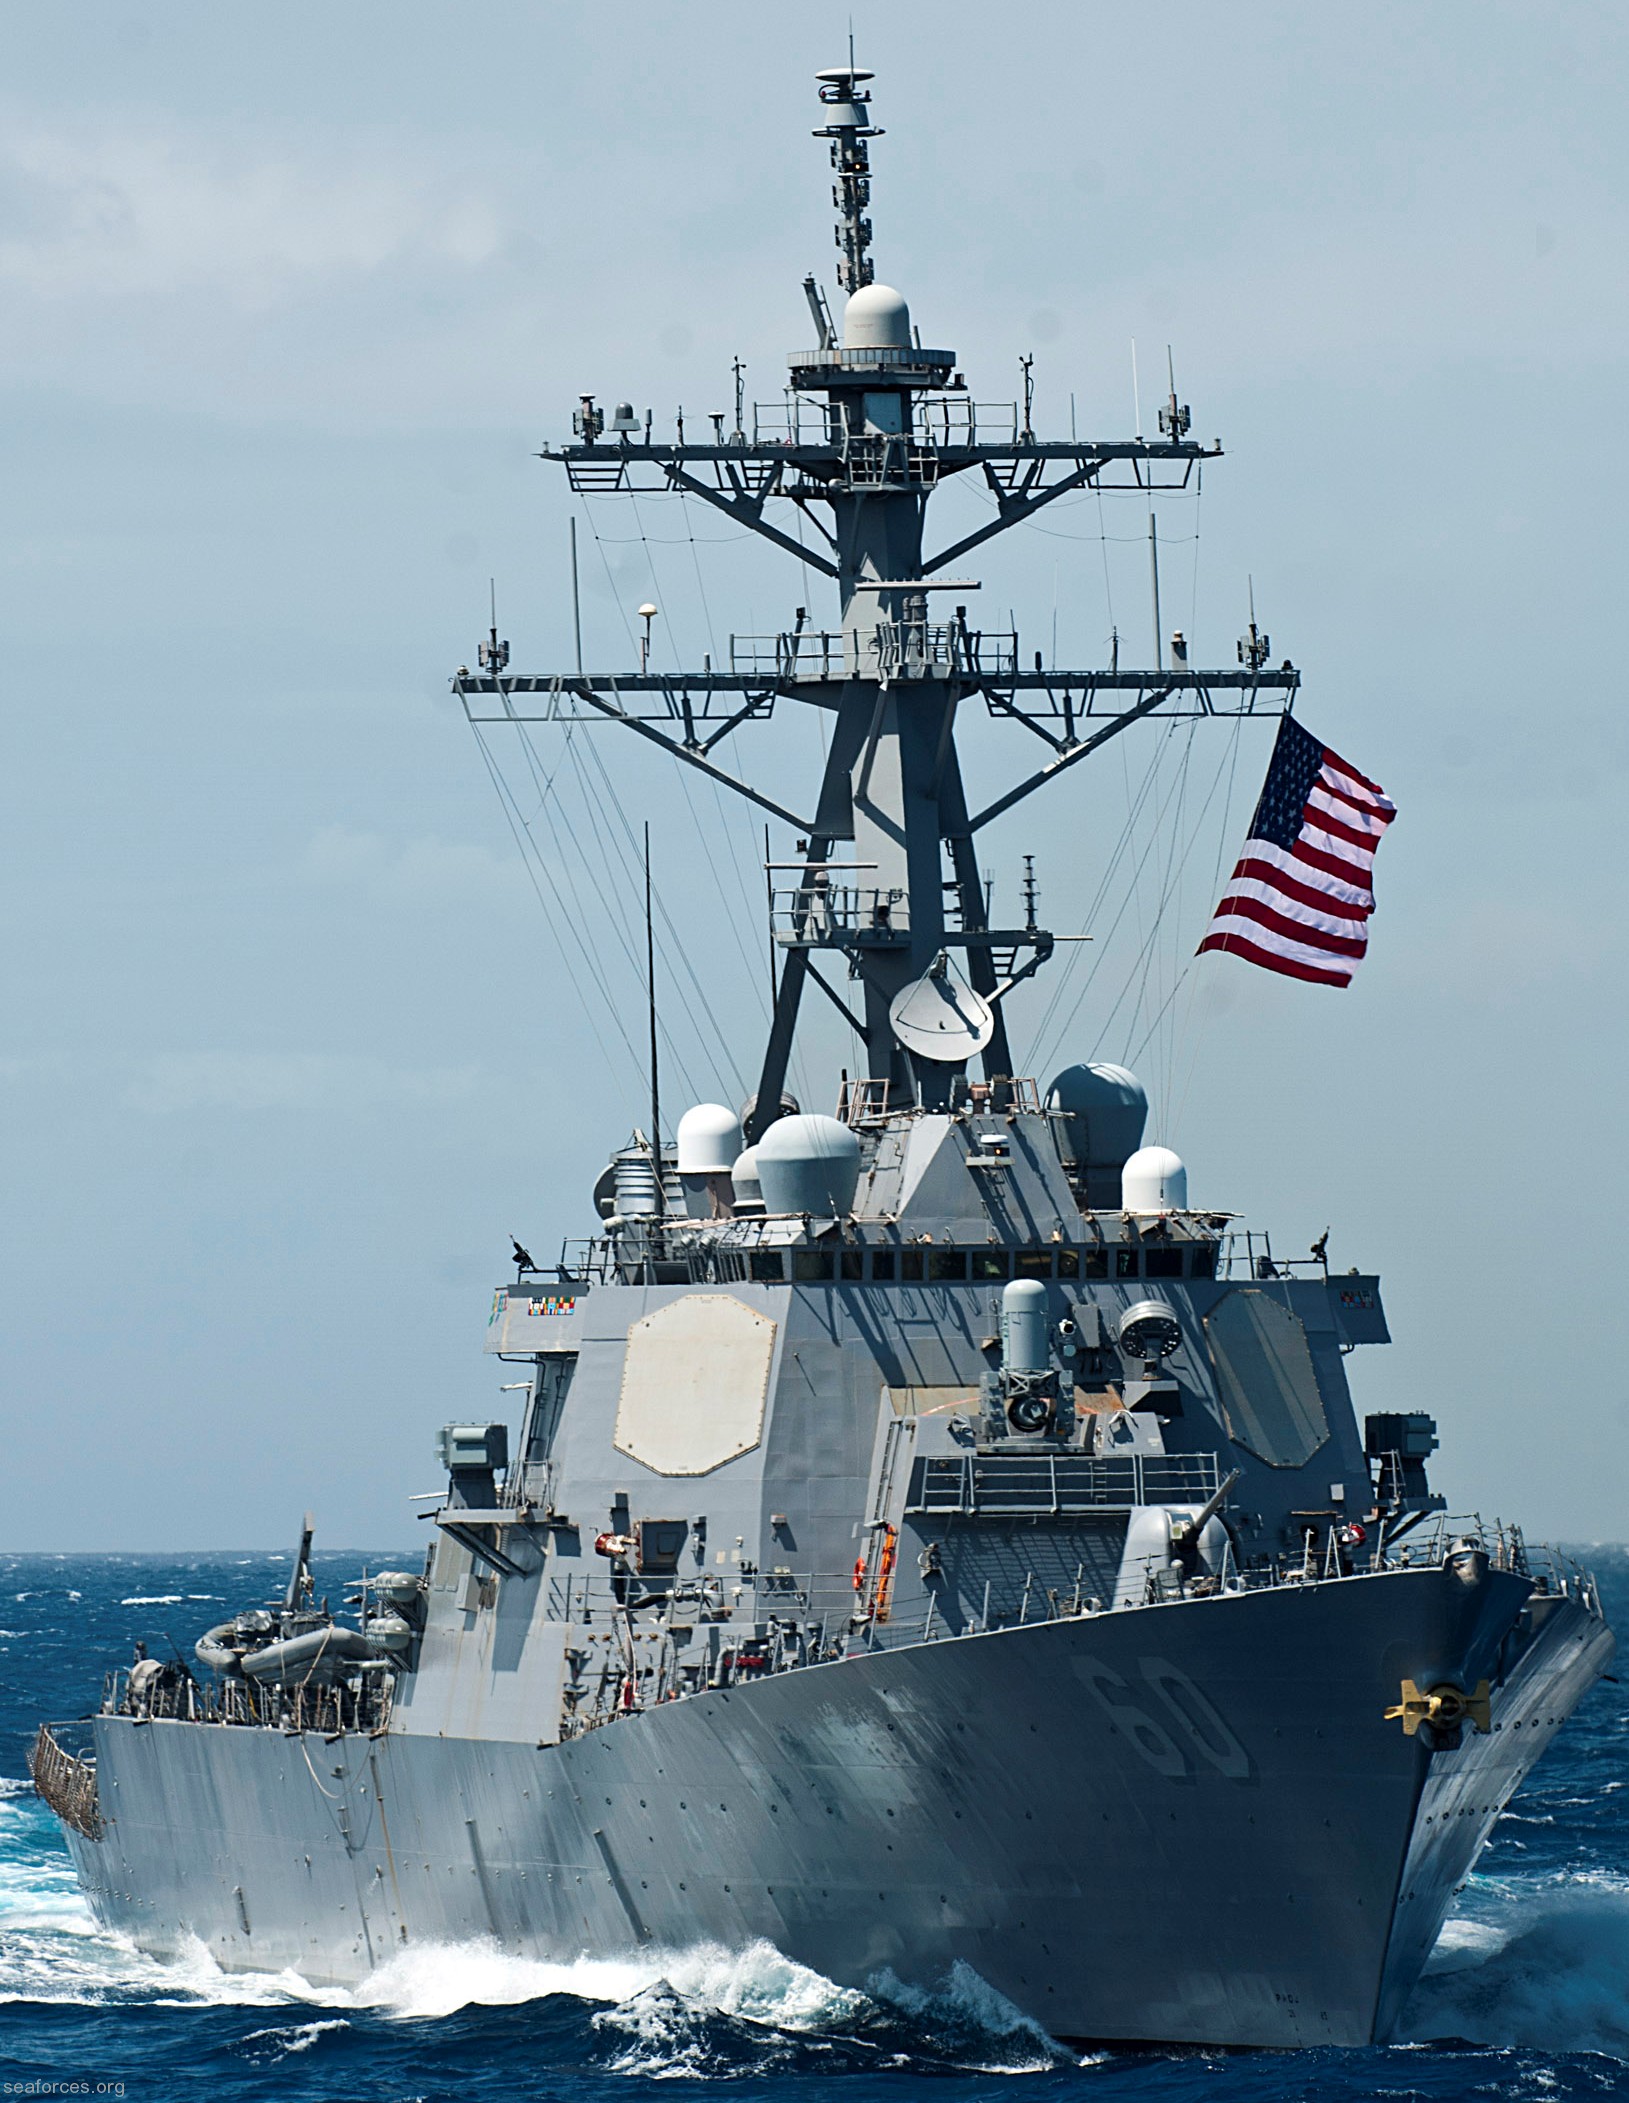 ddg-60 uss paul hamilton guided missile destroyer us navy 13